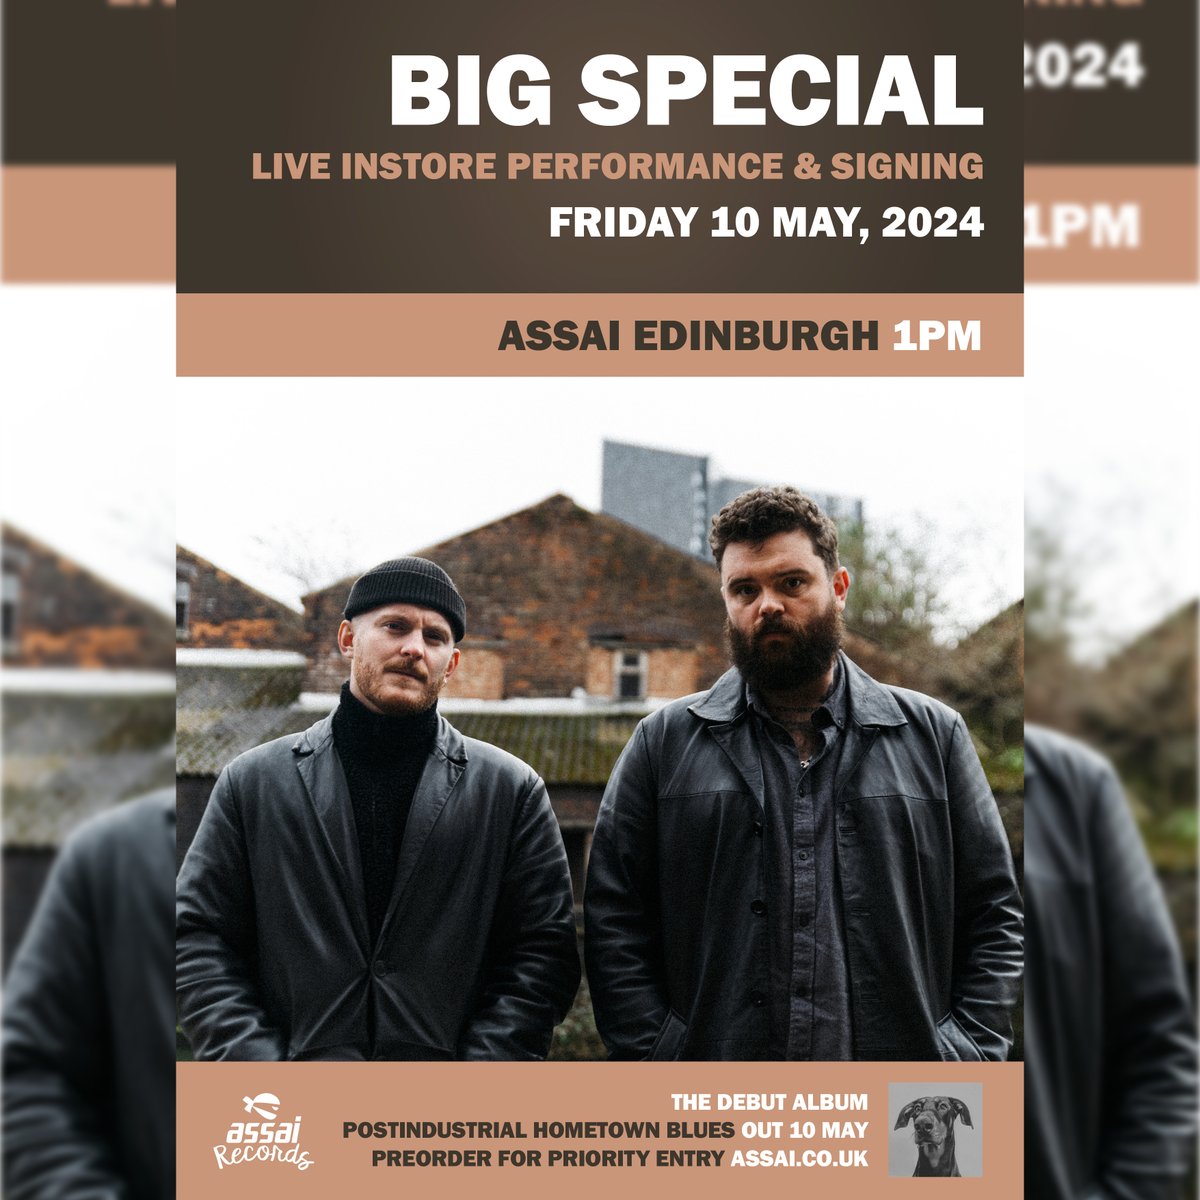 Live Instore Appearance - @BIGSPECIAL_ Big Special join us on release day of debut album 'Postindustrial Hometown Blues' for a live instore performance & signing! Pre-order the album to grab priority entry: tinyurl.com/BigSpecial @SoRecordings